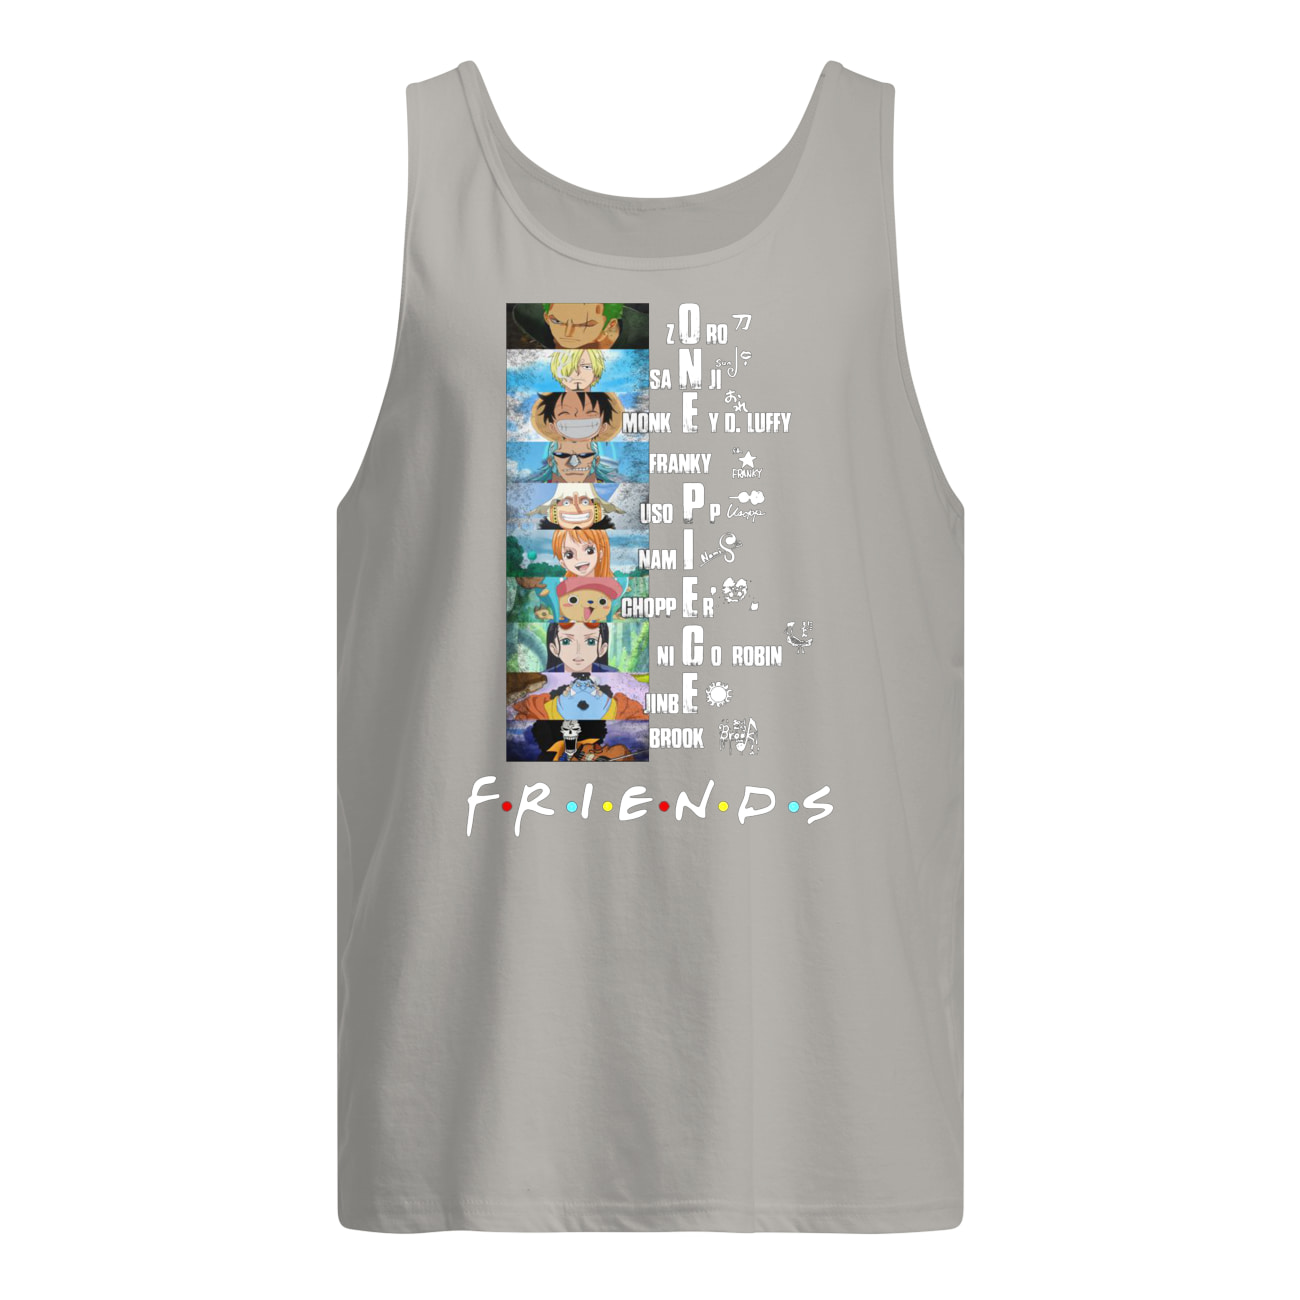 Friends tv show one piece characters signatures tank top